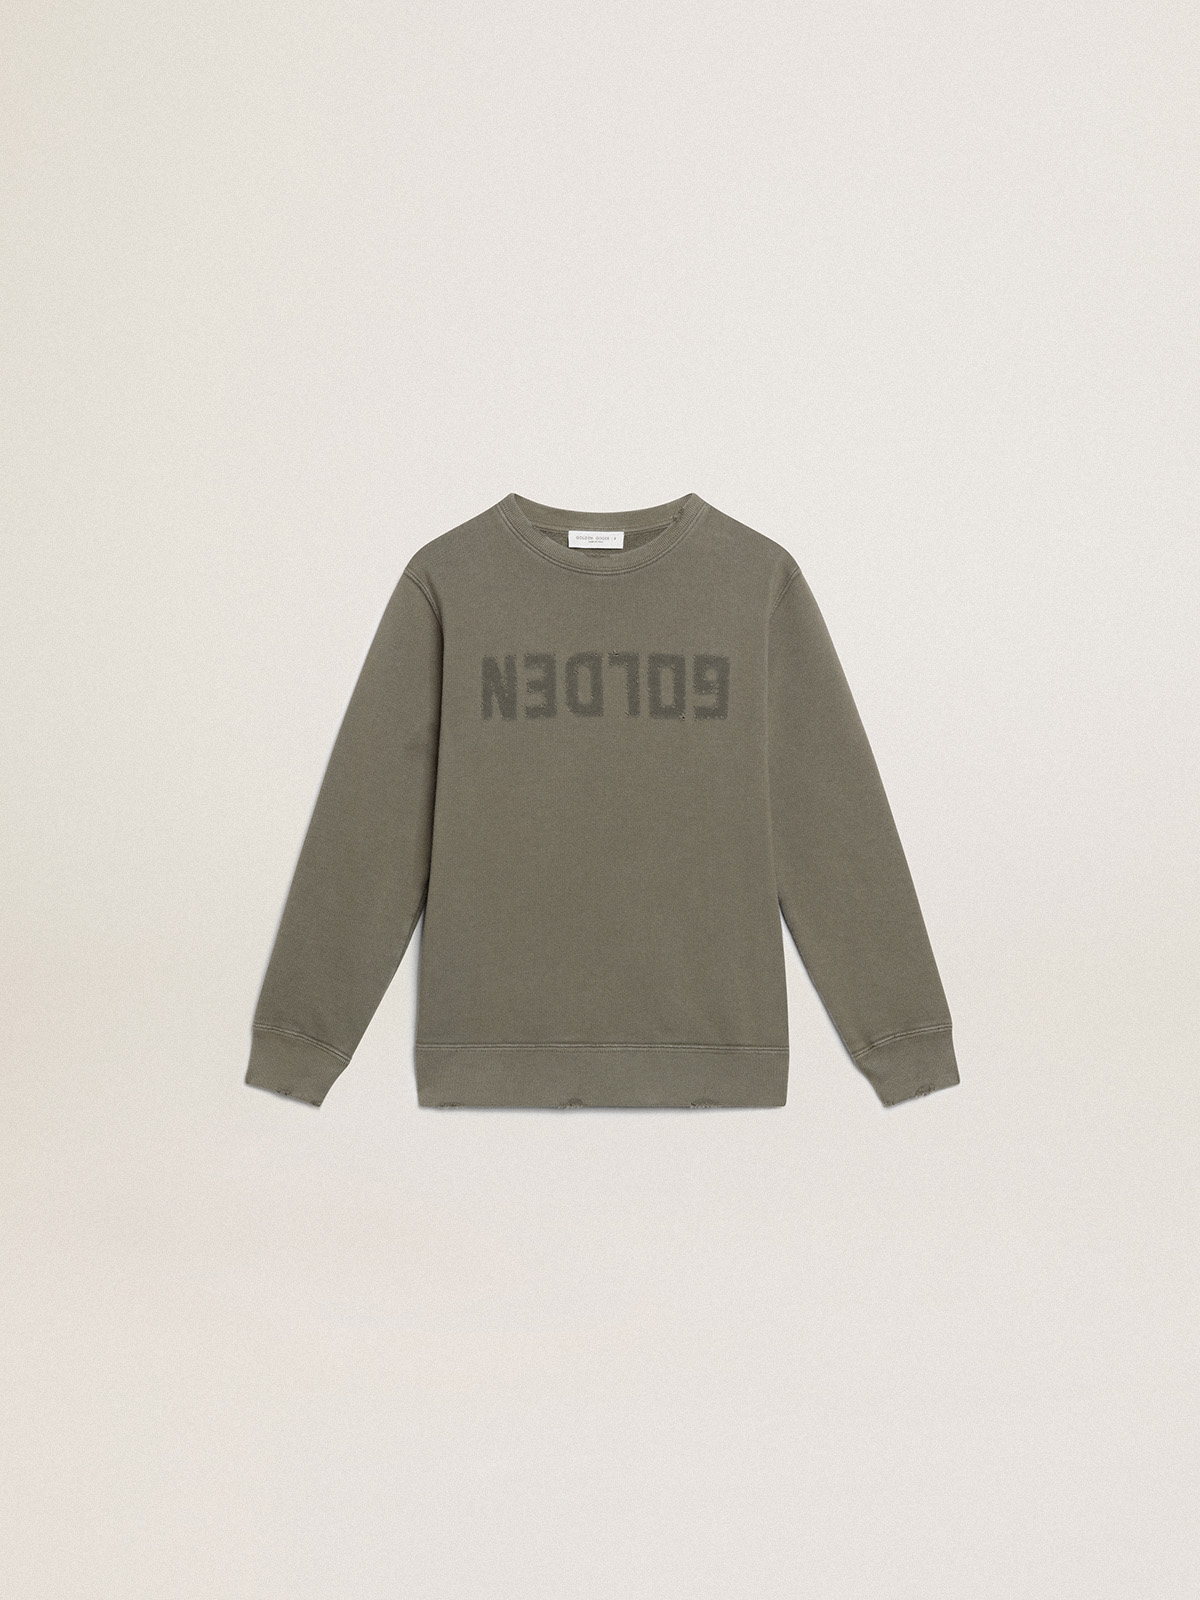 Distressed olive-green sweatshirt with Golden lettering on the 